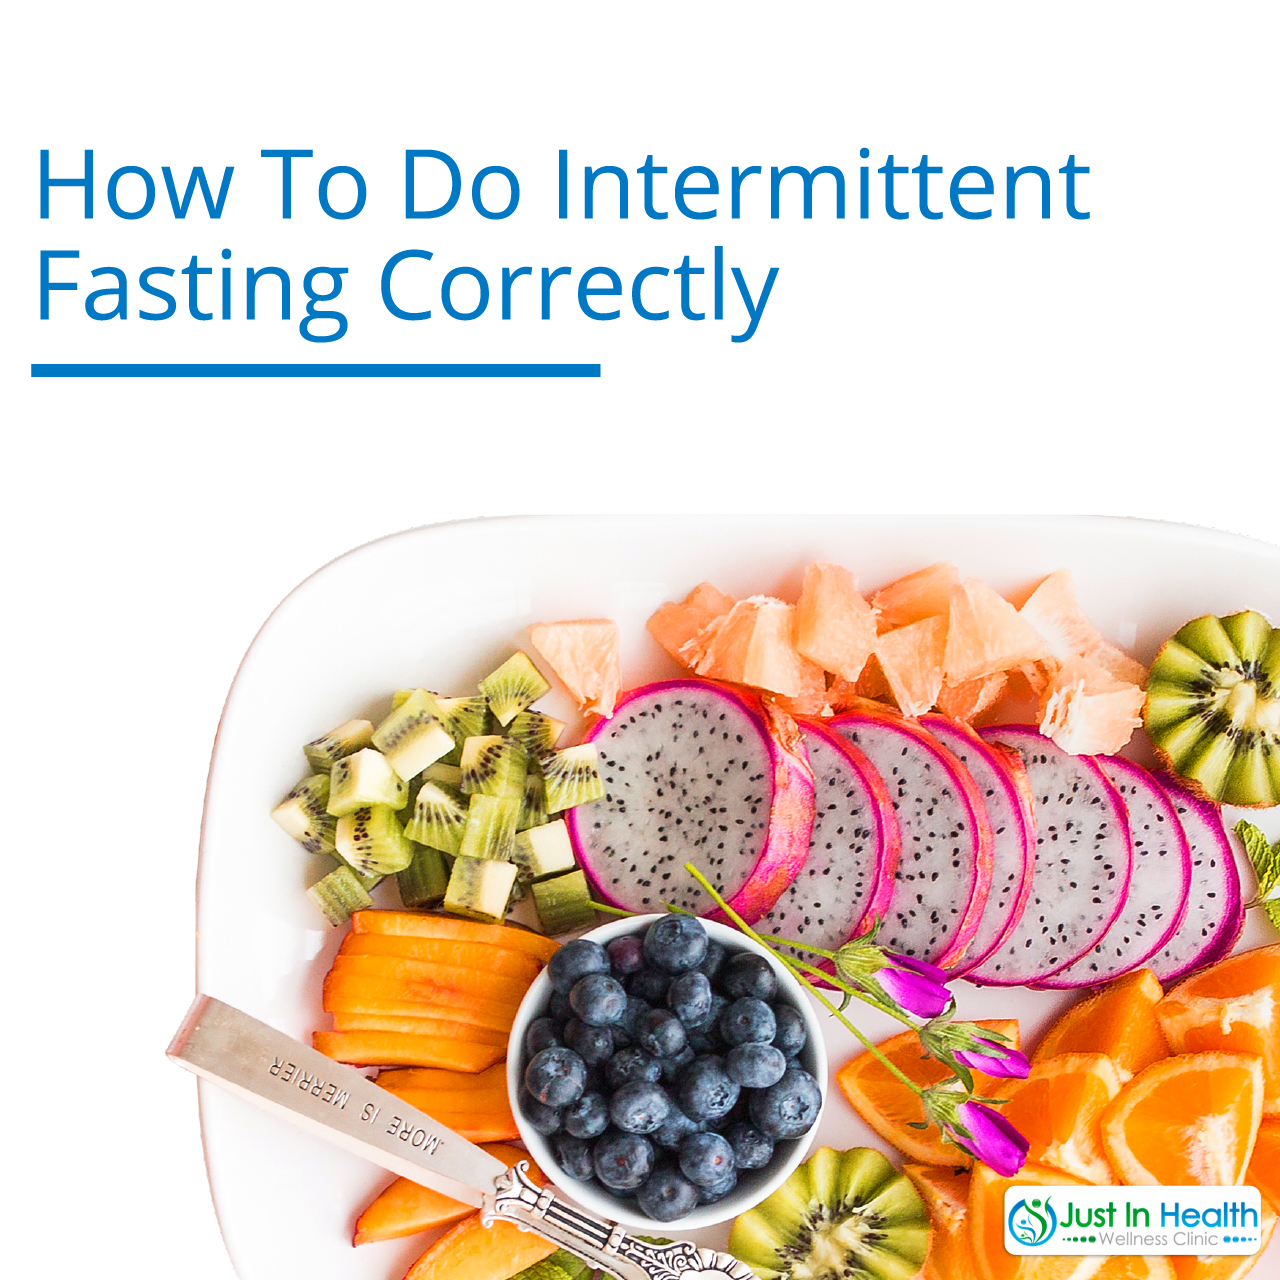 How to do intermittent fasting correctly